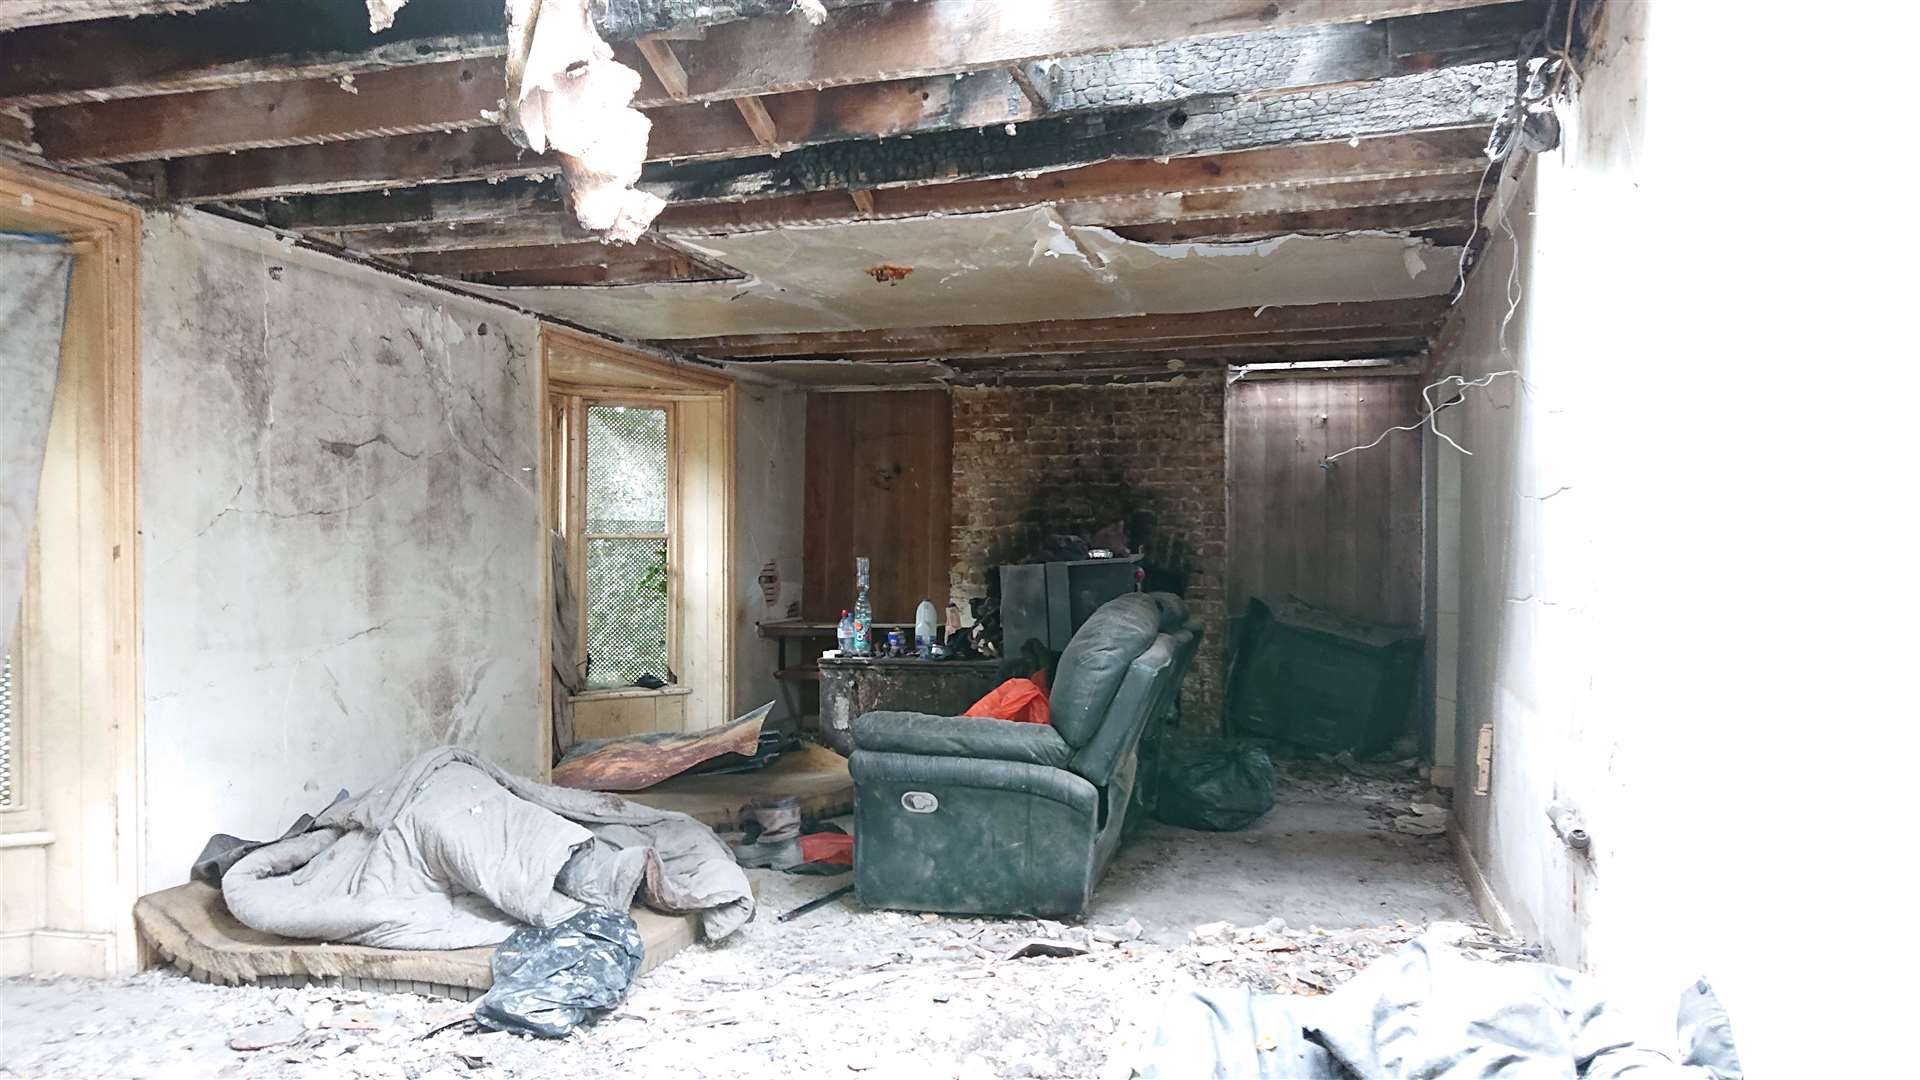 The inside of the derelict house. Picture: Paul Jones